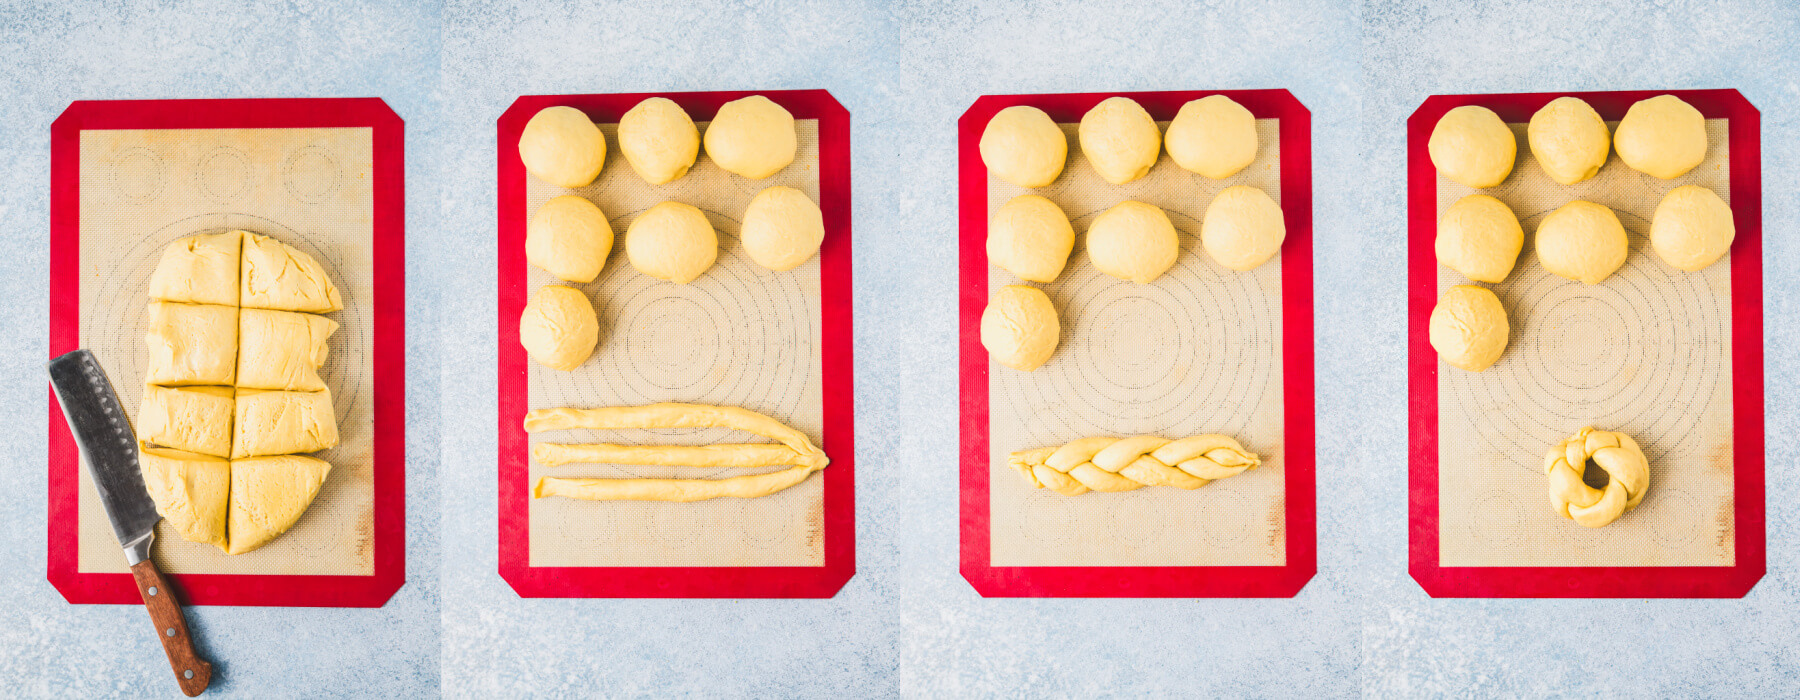 A series of process images showing how to divide, braid, and shape the dough to make Italian Easter Bread.